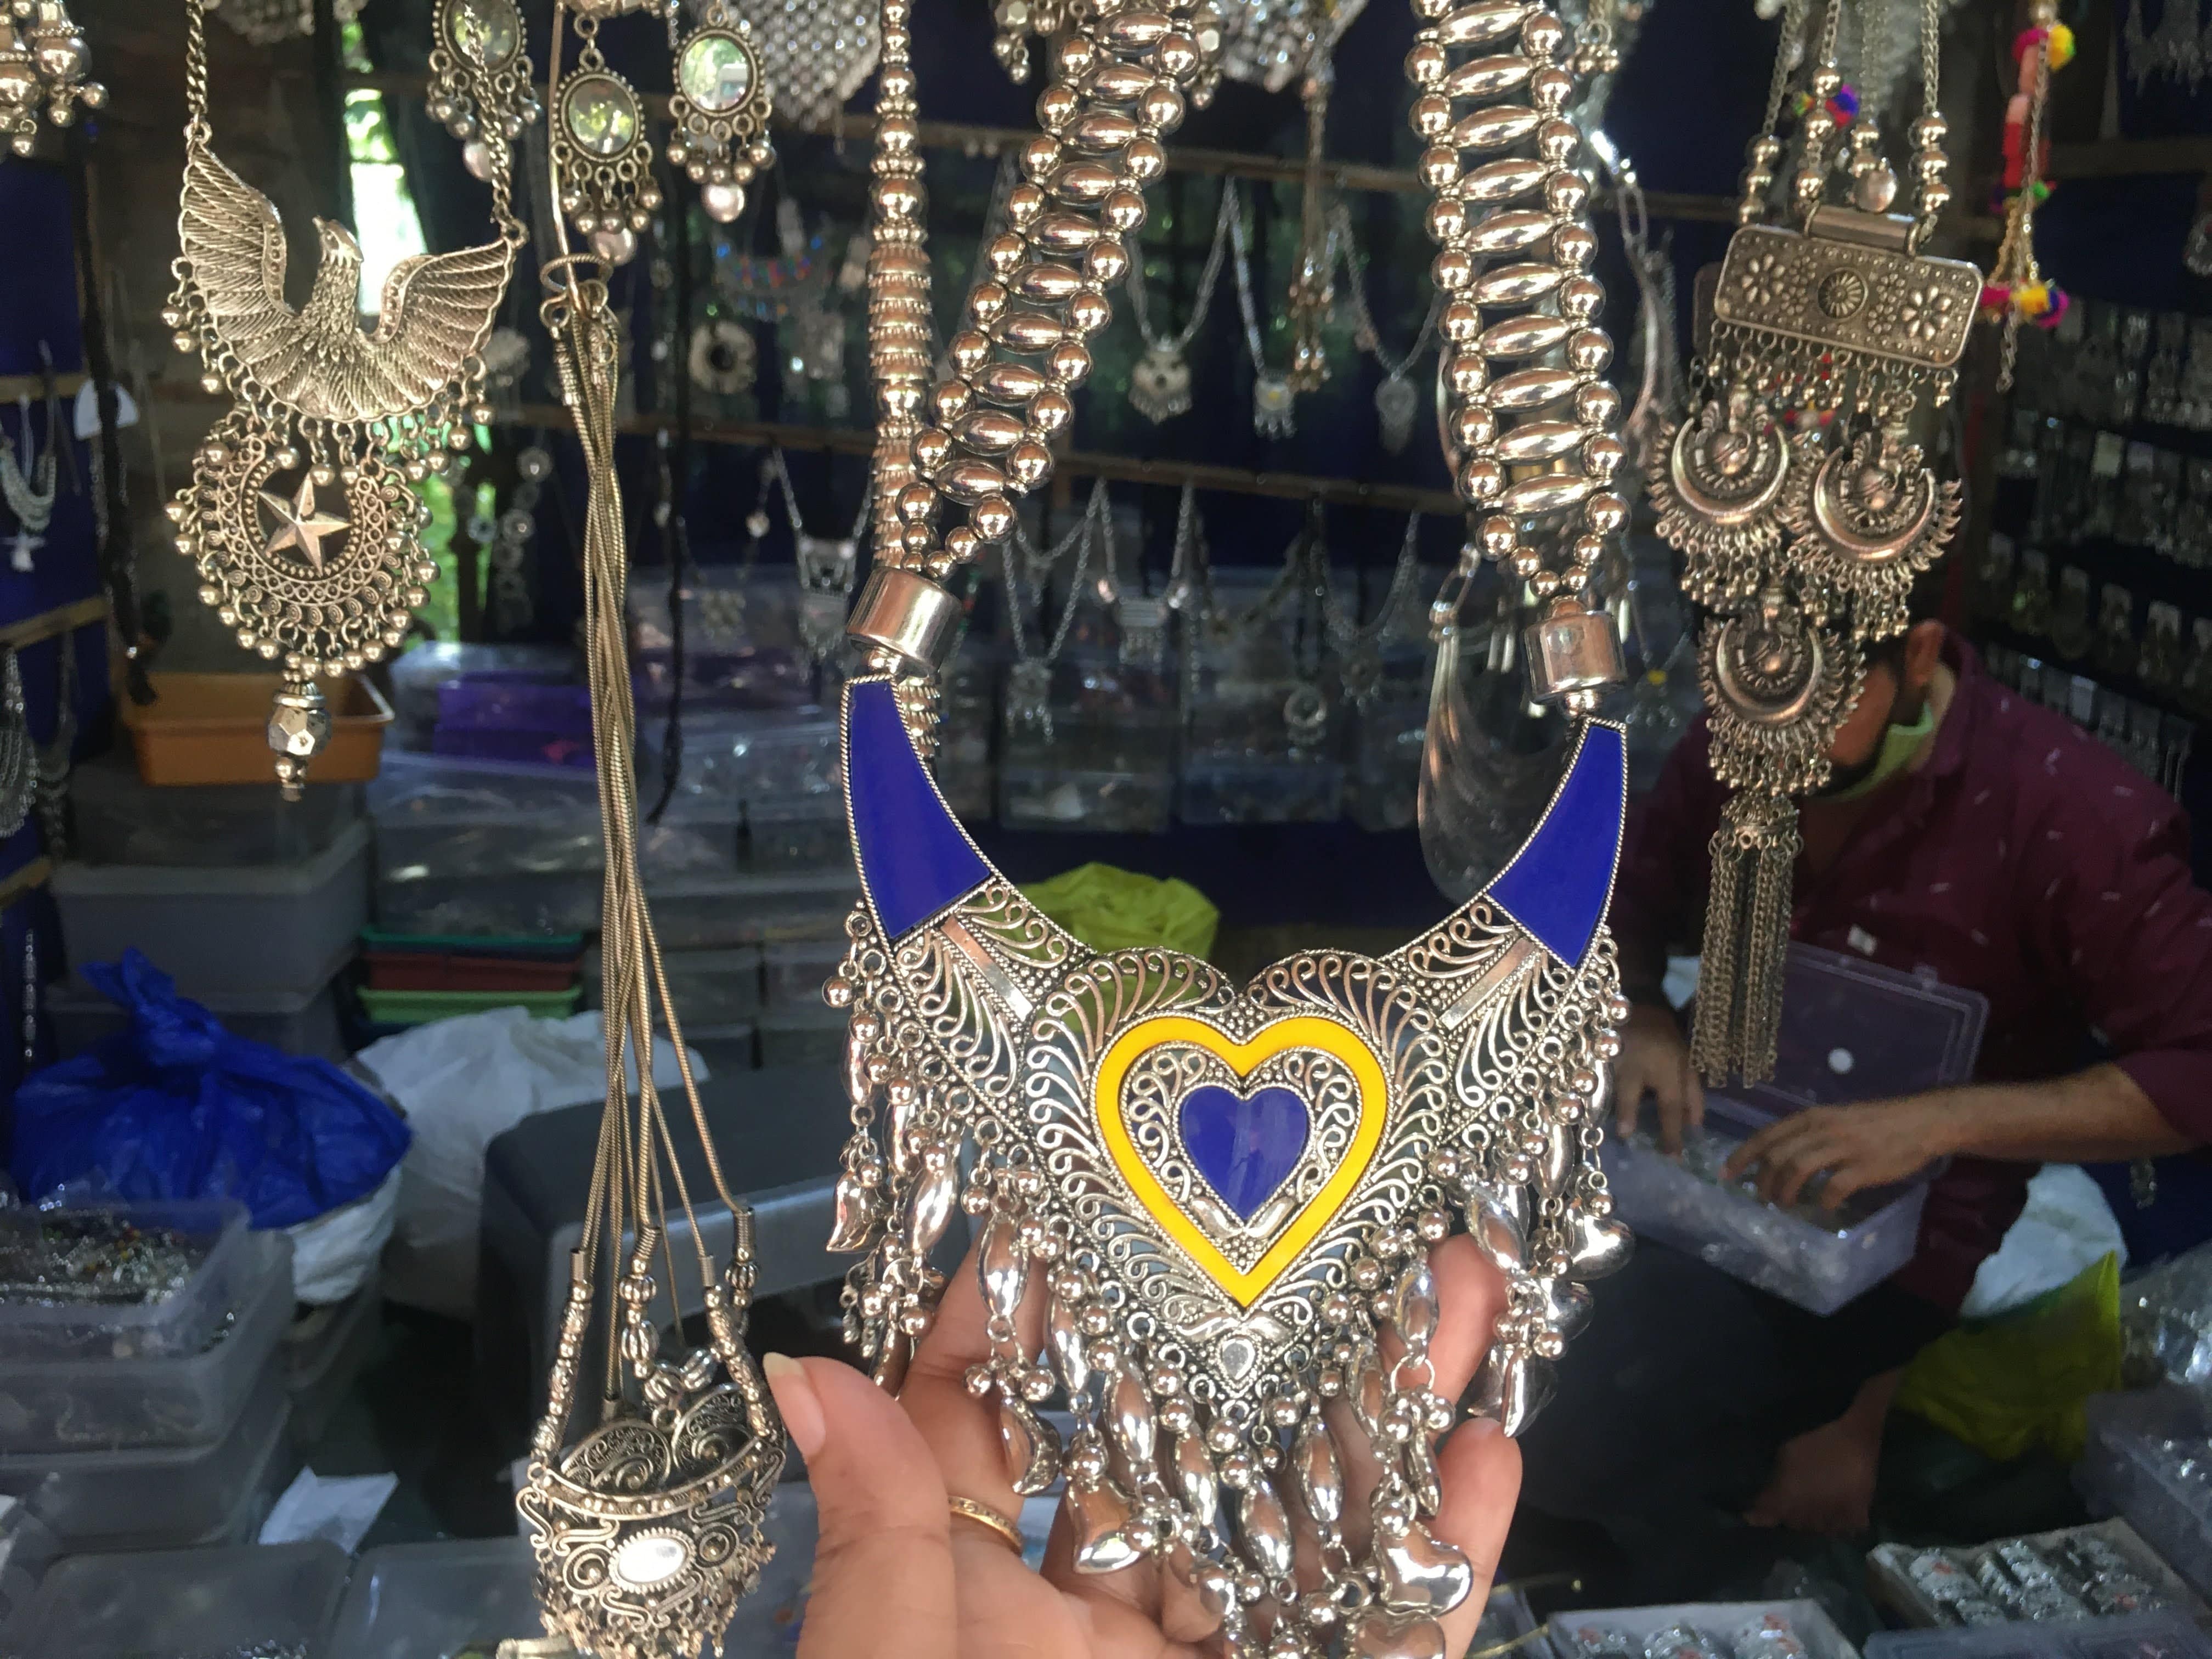 ahmedabad street market - dazzling goods and accessories